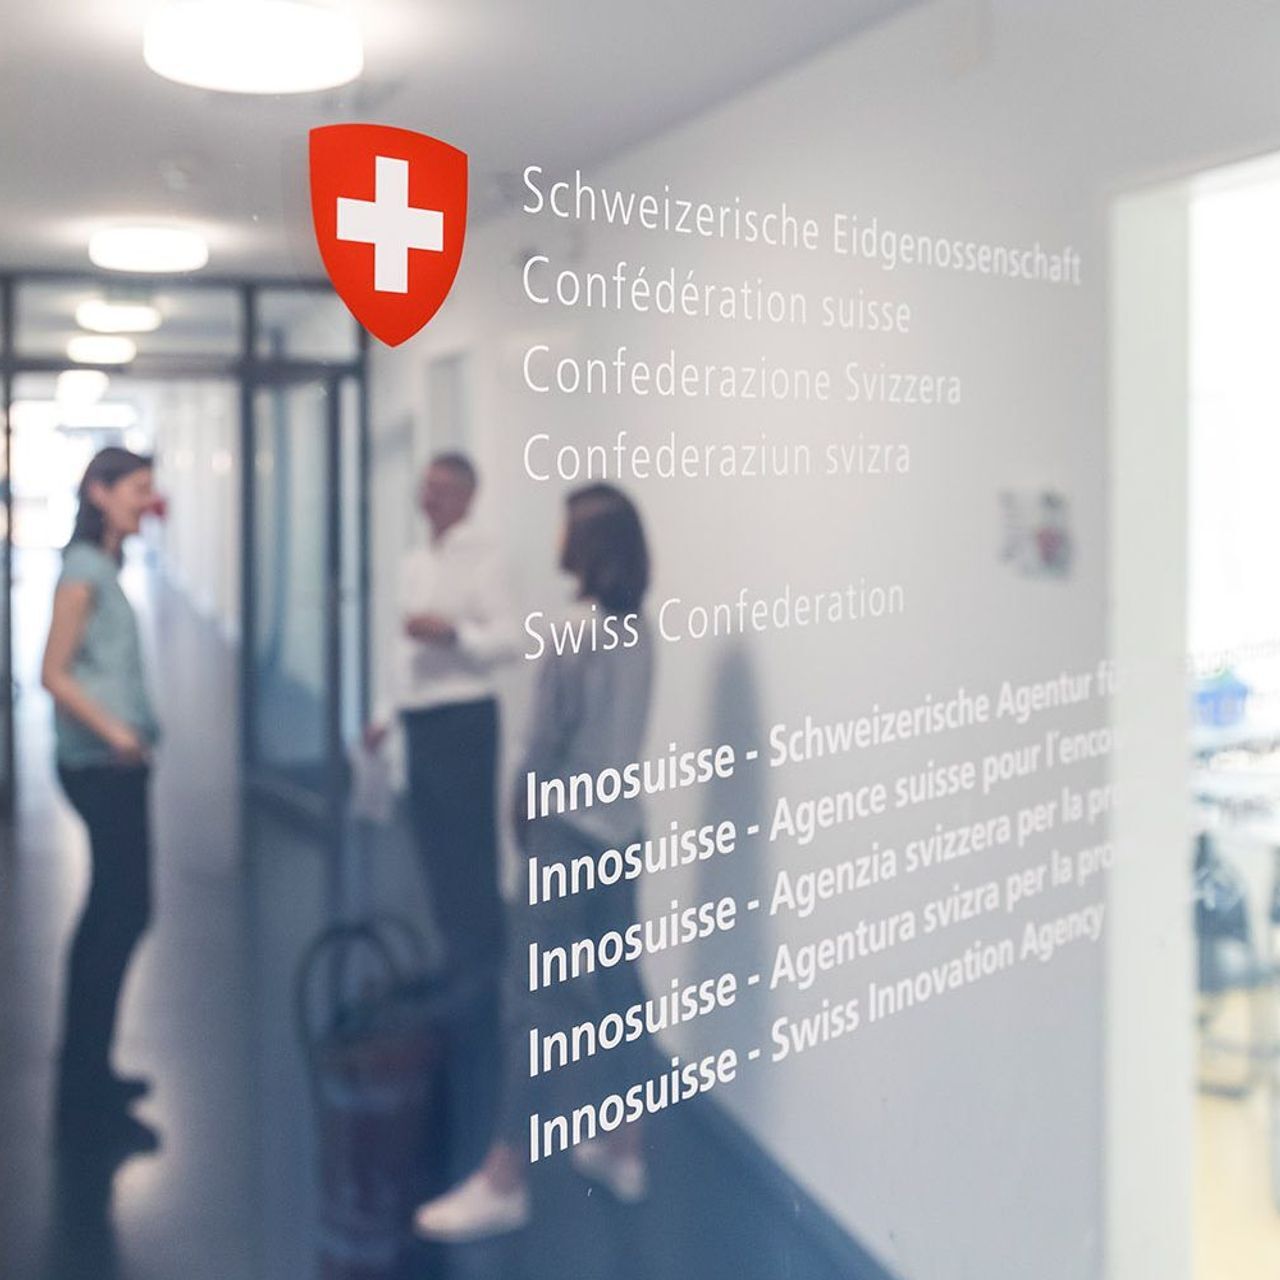 The headquarters of the Swiss Innovation Promotion Agency